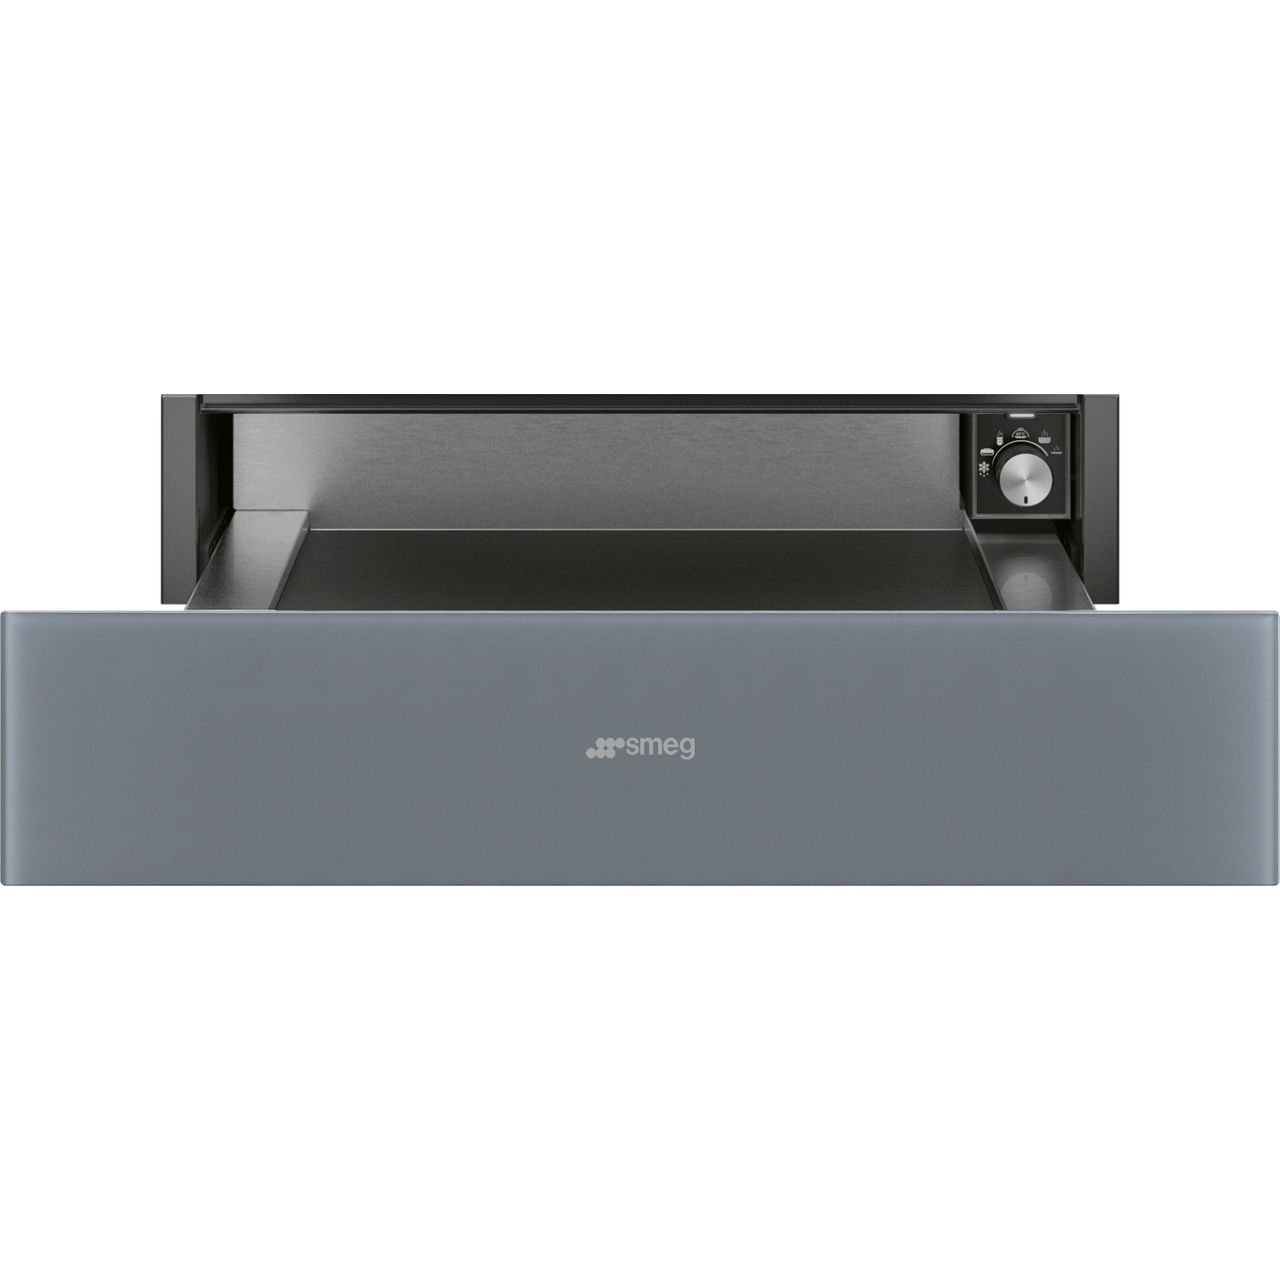 Smeg Linea CPR115S Built In Warming Drawer Review